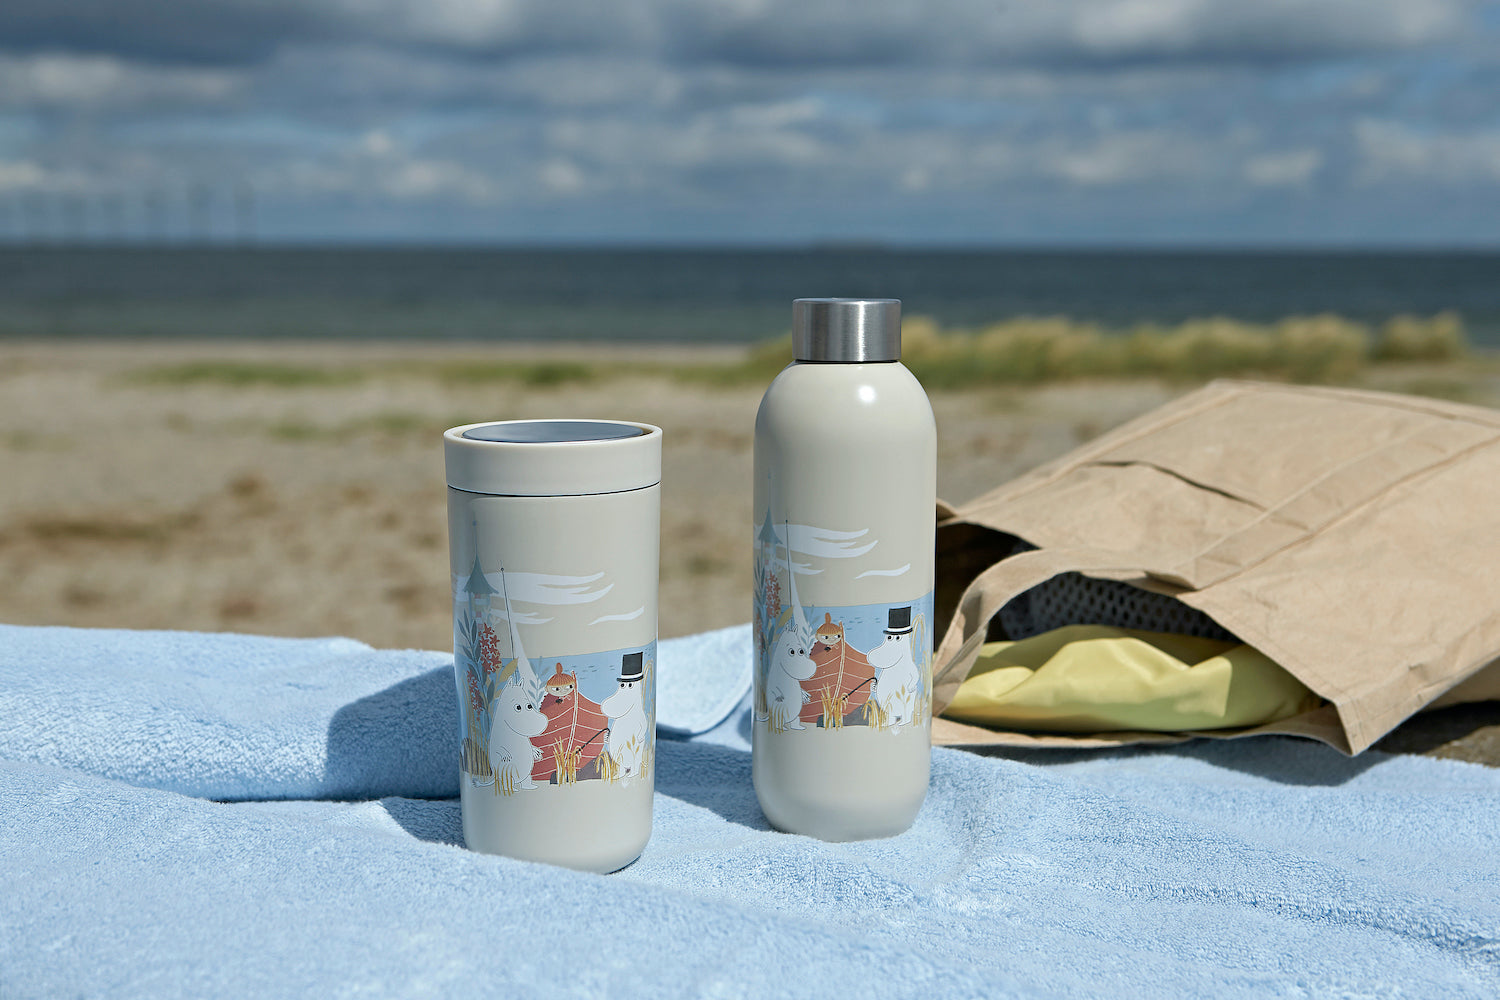 thermal Moomin takeaway bottle and cup on blanket on beach